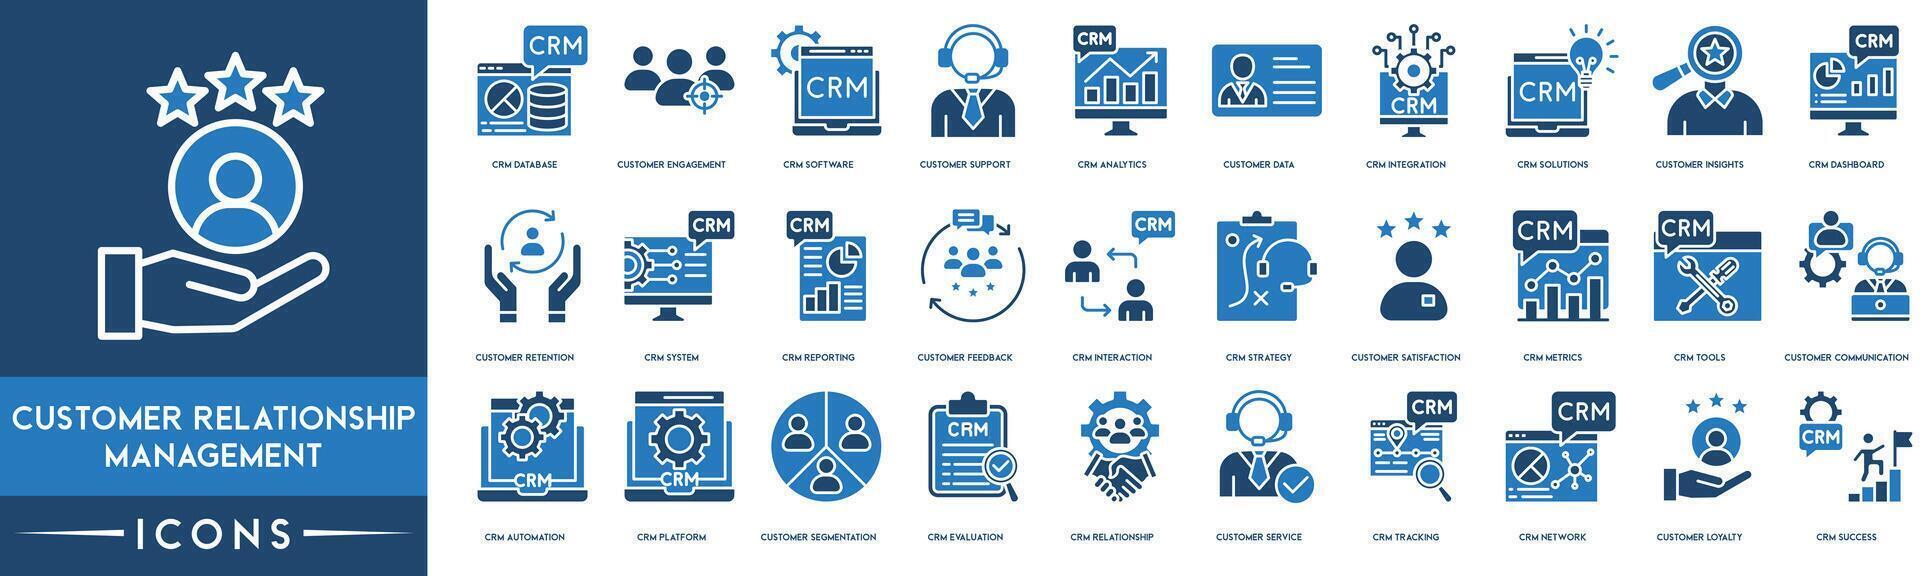 Customer Relationship Management icon set. CRM Database, Customer Engagement, Software, Customer Support, Analytics, Customer Data, CRM Integration and CRM Solutions icon vector